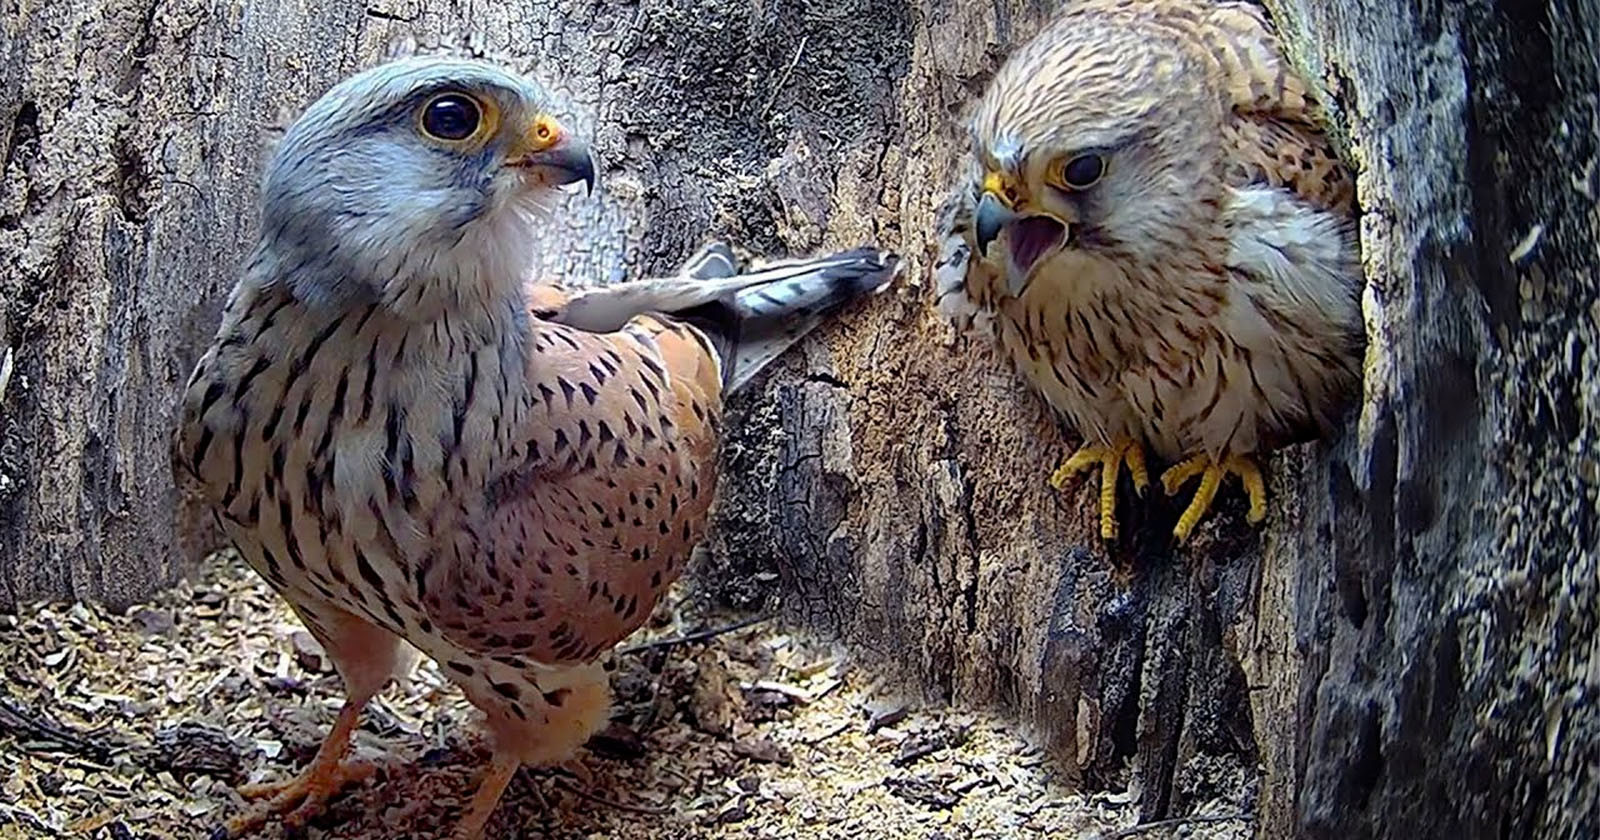 Amazing, Intimate Footage Shows a Kestrel Couples First Year Together